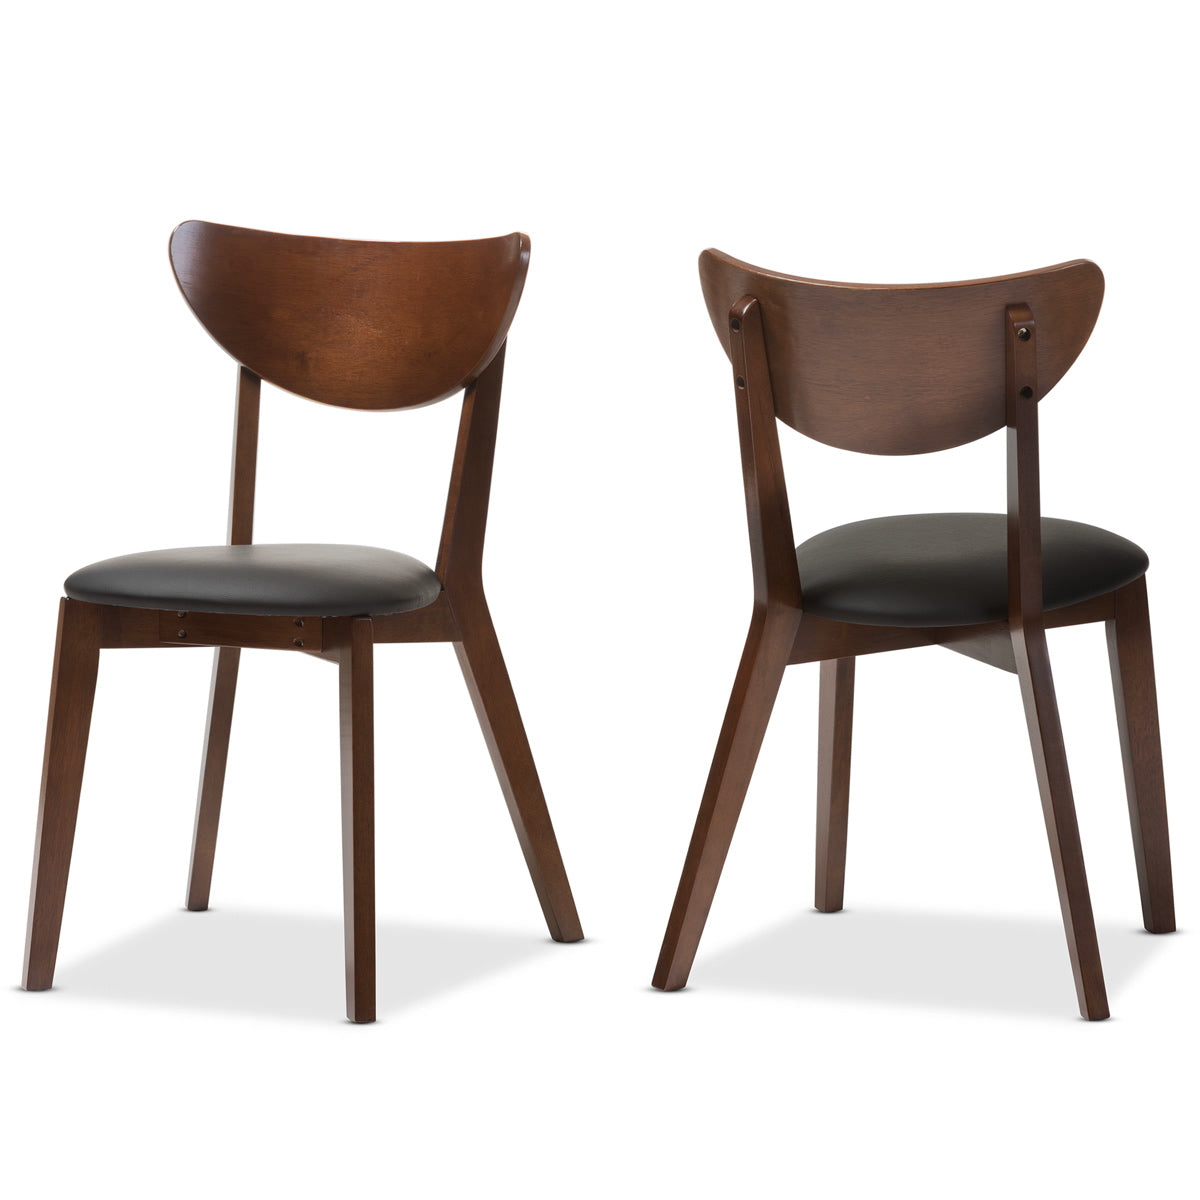 Baxton Studio Sumner Mid-Century Black Faux Leather and Walnut Brown Dining Chair Baxton Studio-dining chair-Minimal And Modern - 2